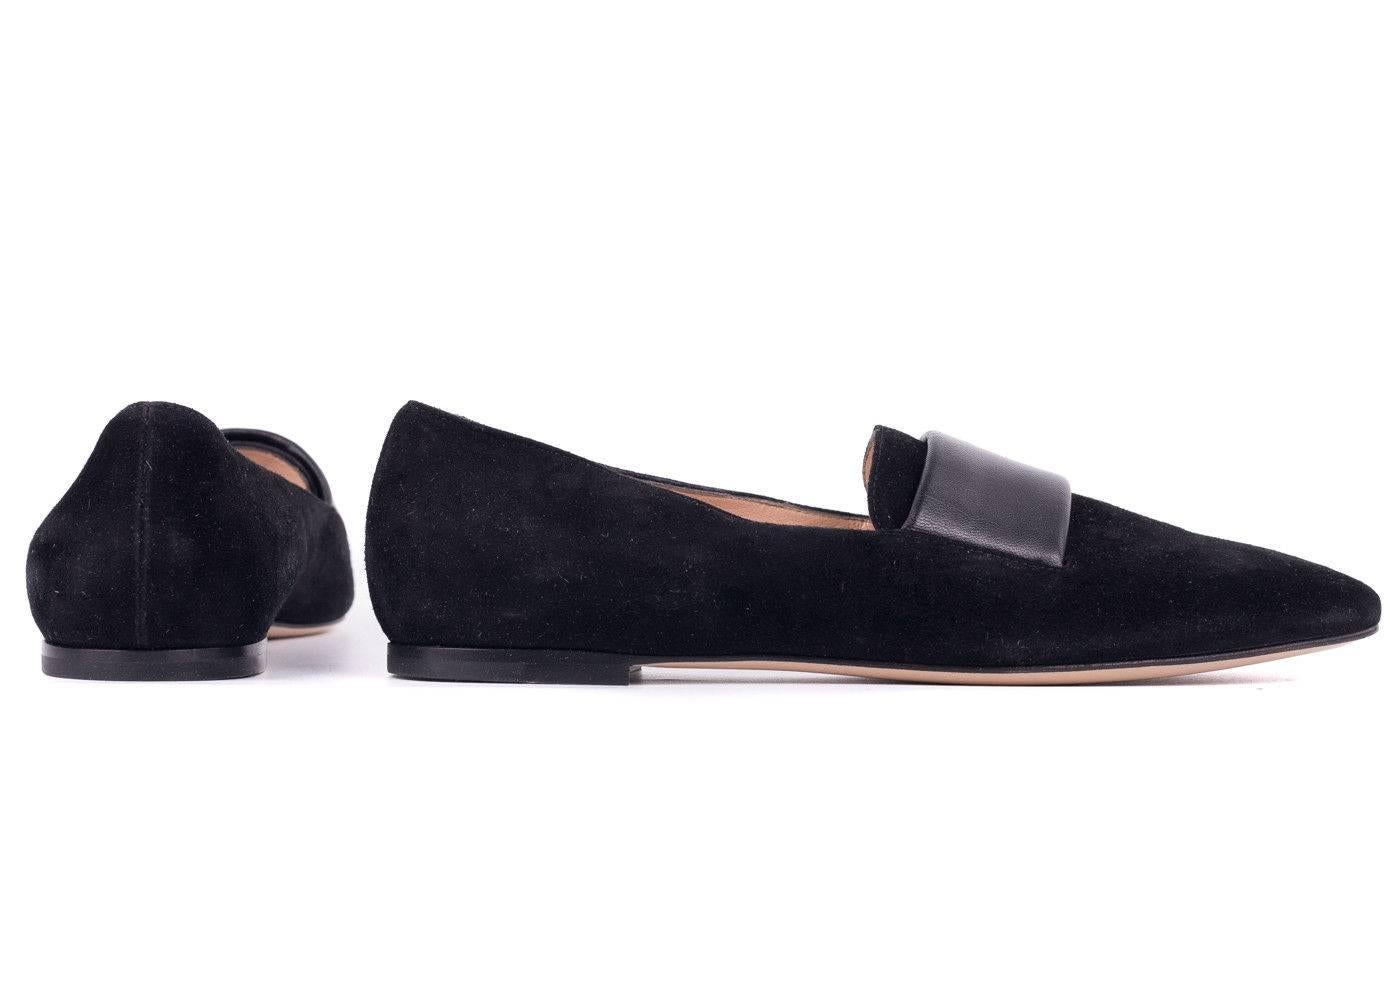 Gianvito Rossi Black Suede Leather Strap Square Toe Flats In New Condition For Sale In Brooklyn, NY